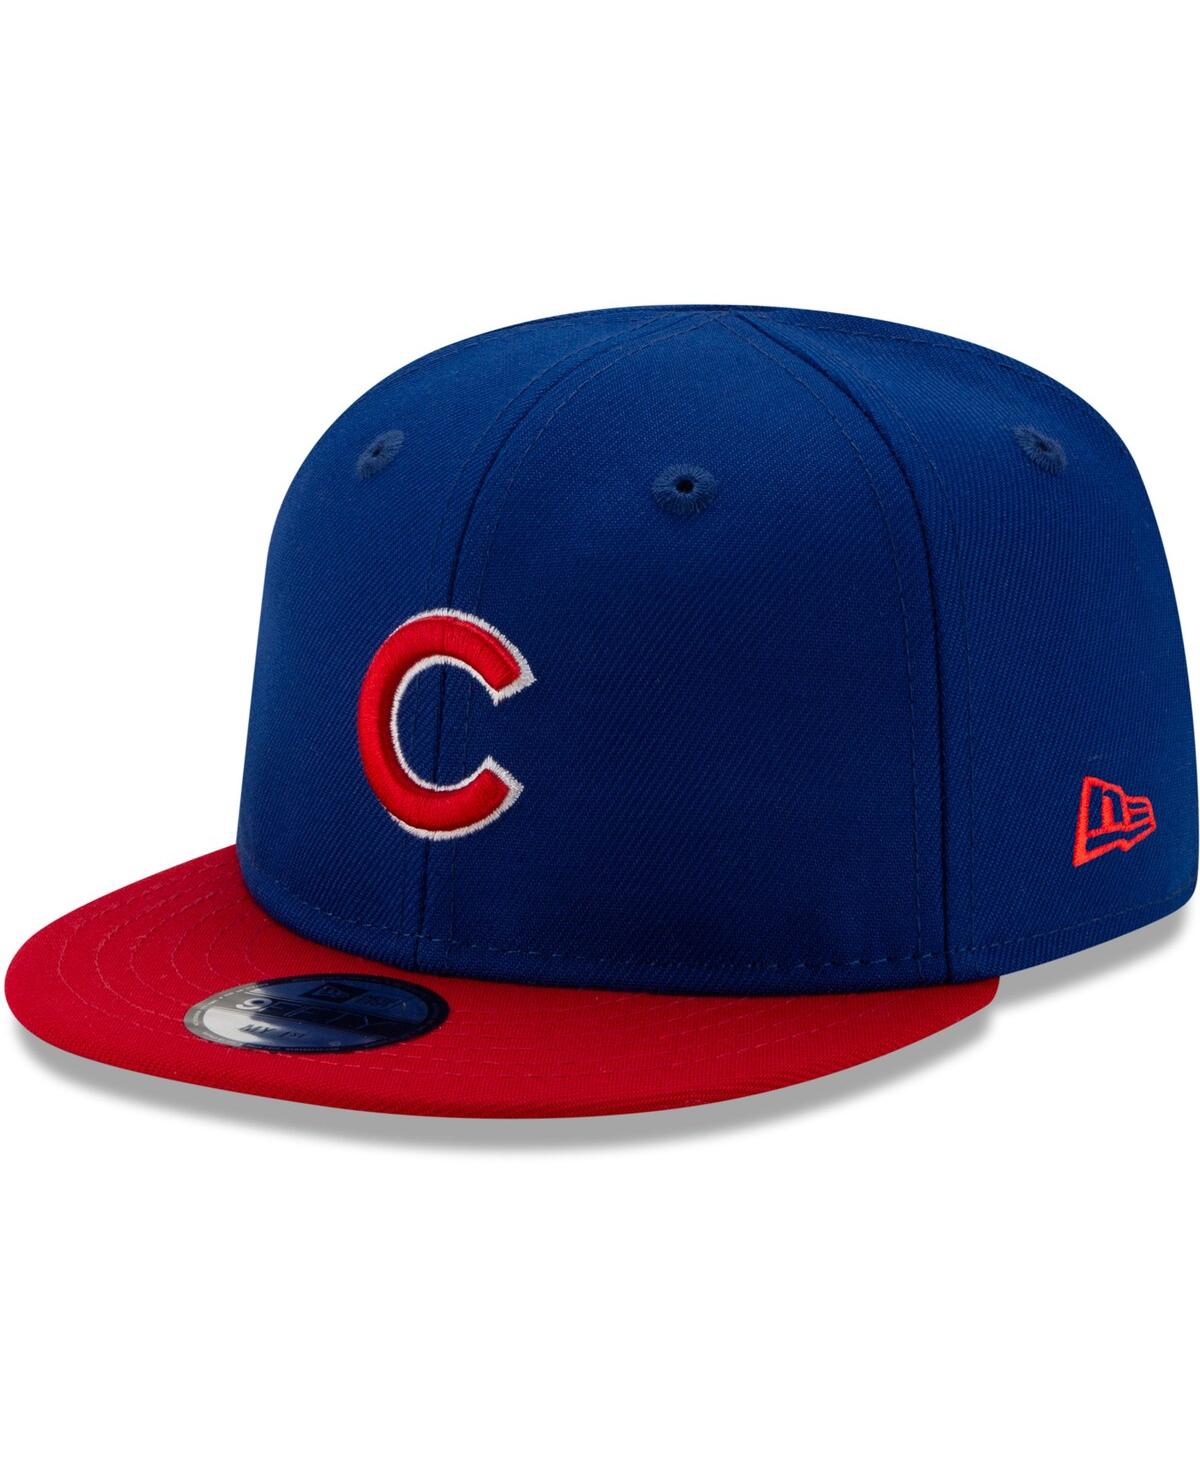 New Era Kids' Infant Unisex  Royal Chicago Cubs My First 9fifty Hat